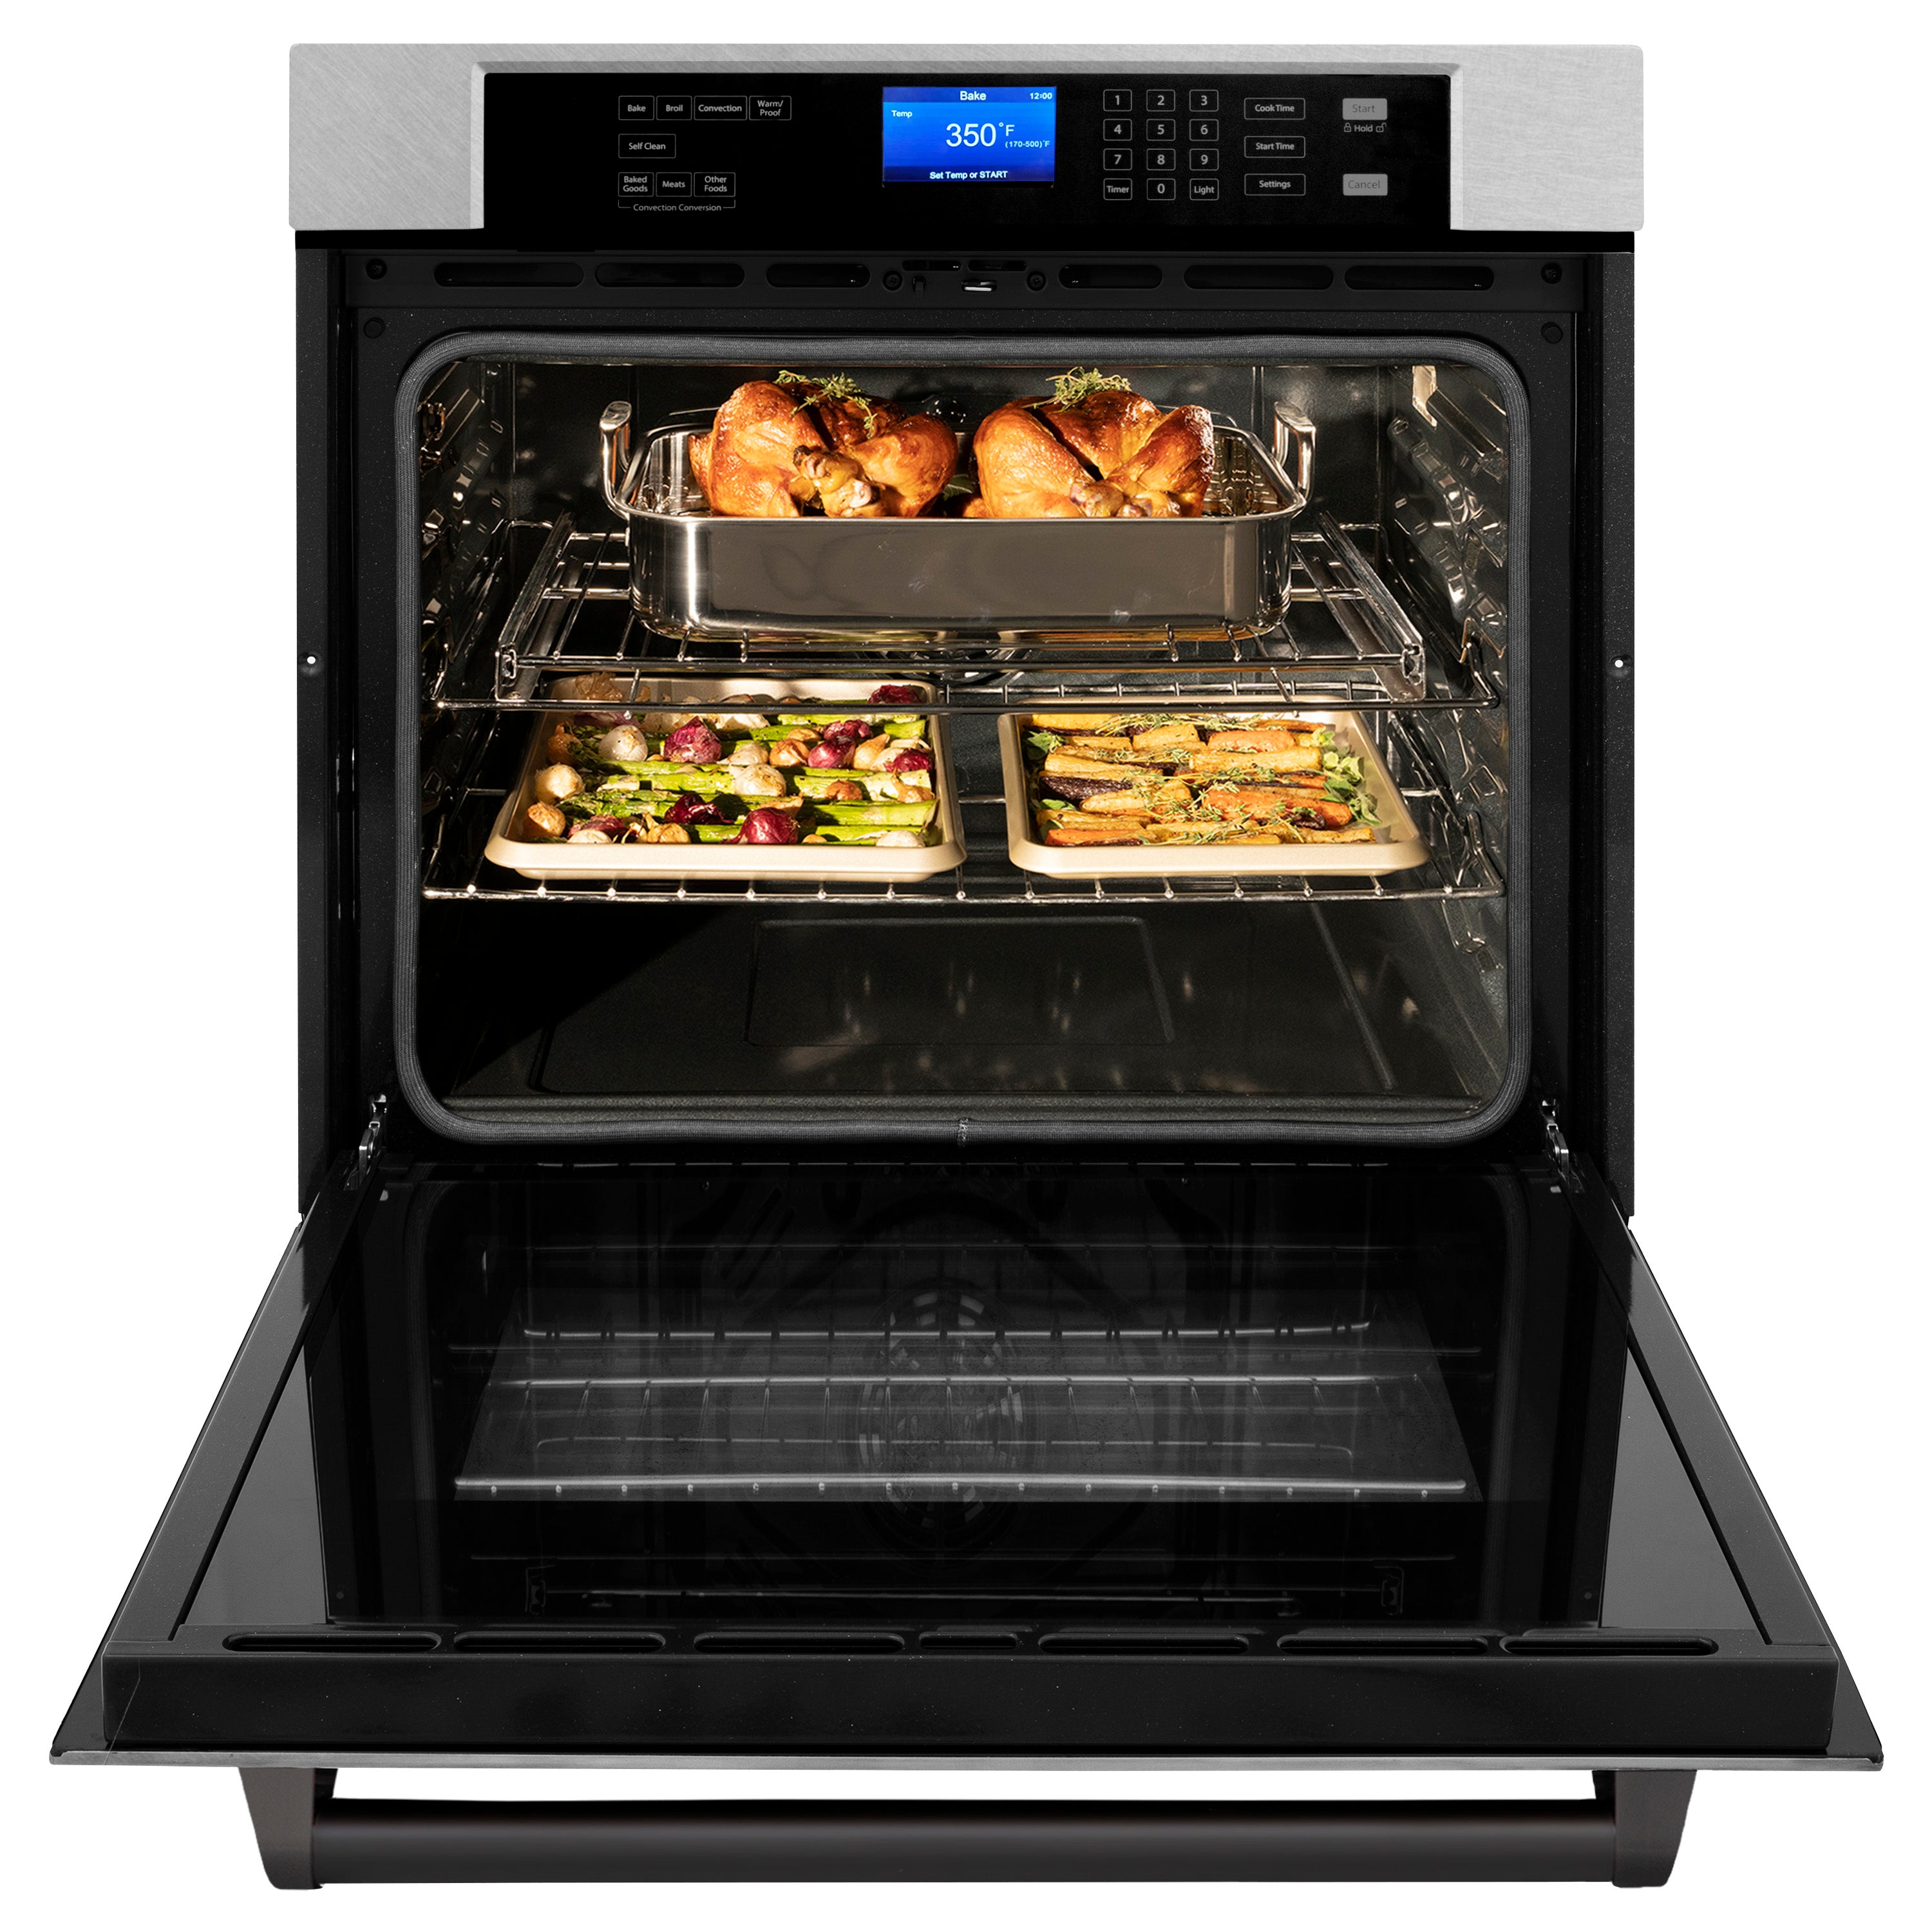 ZLINE 30" Autograph Edition Single Wall Oven with Self Clean and True Convection in Fingerprint Resistant Stainless Steel and Matte Black (AWSSZ-30-MB)